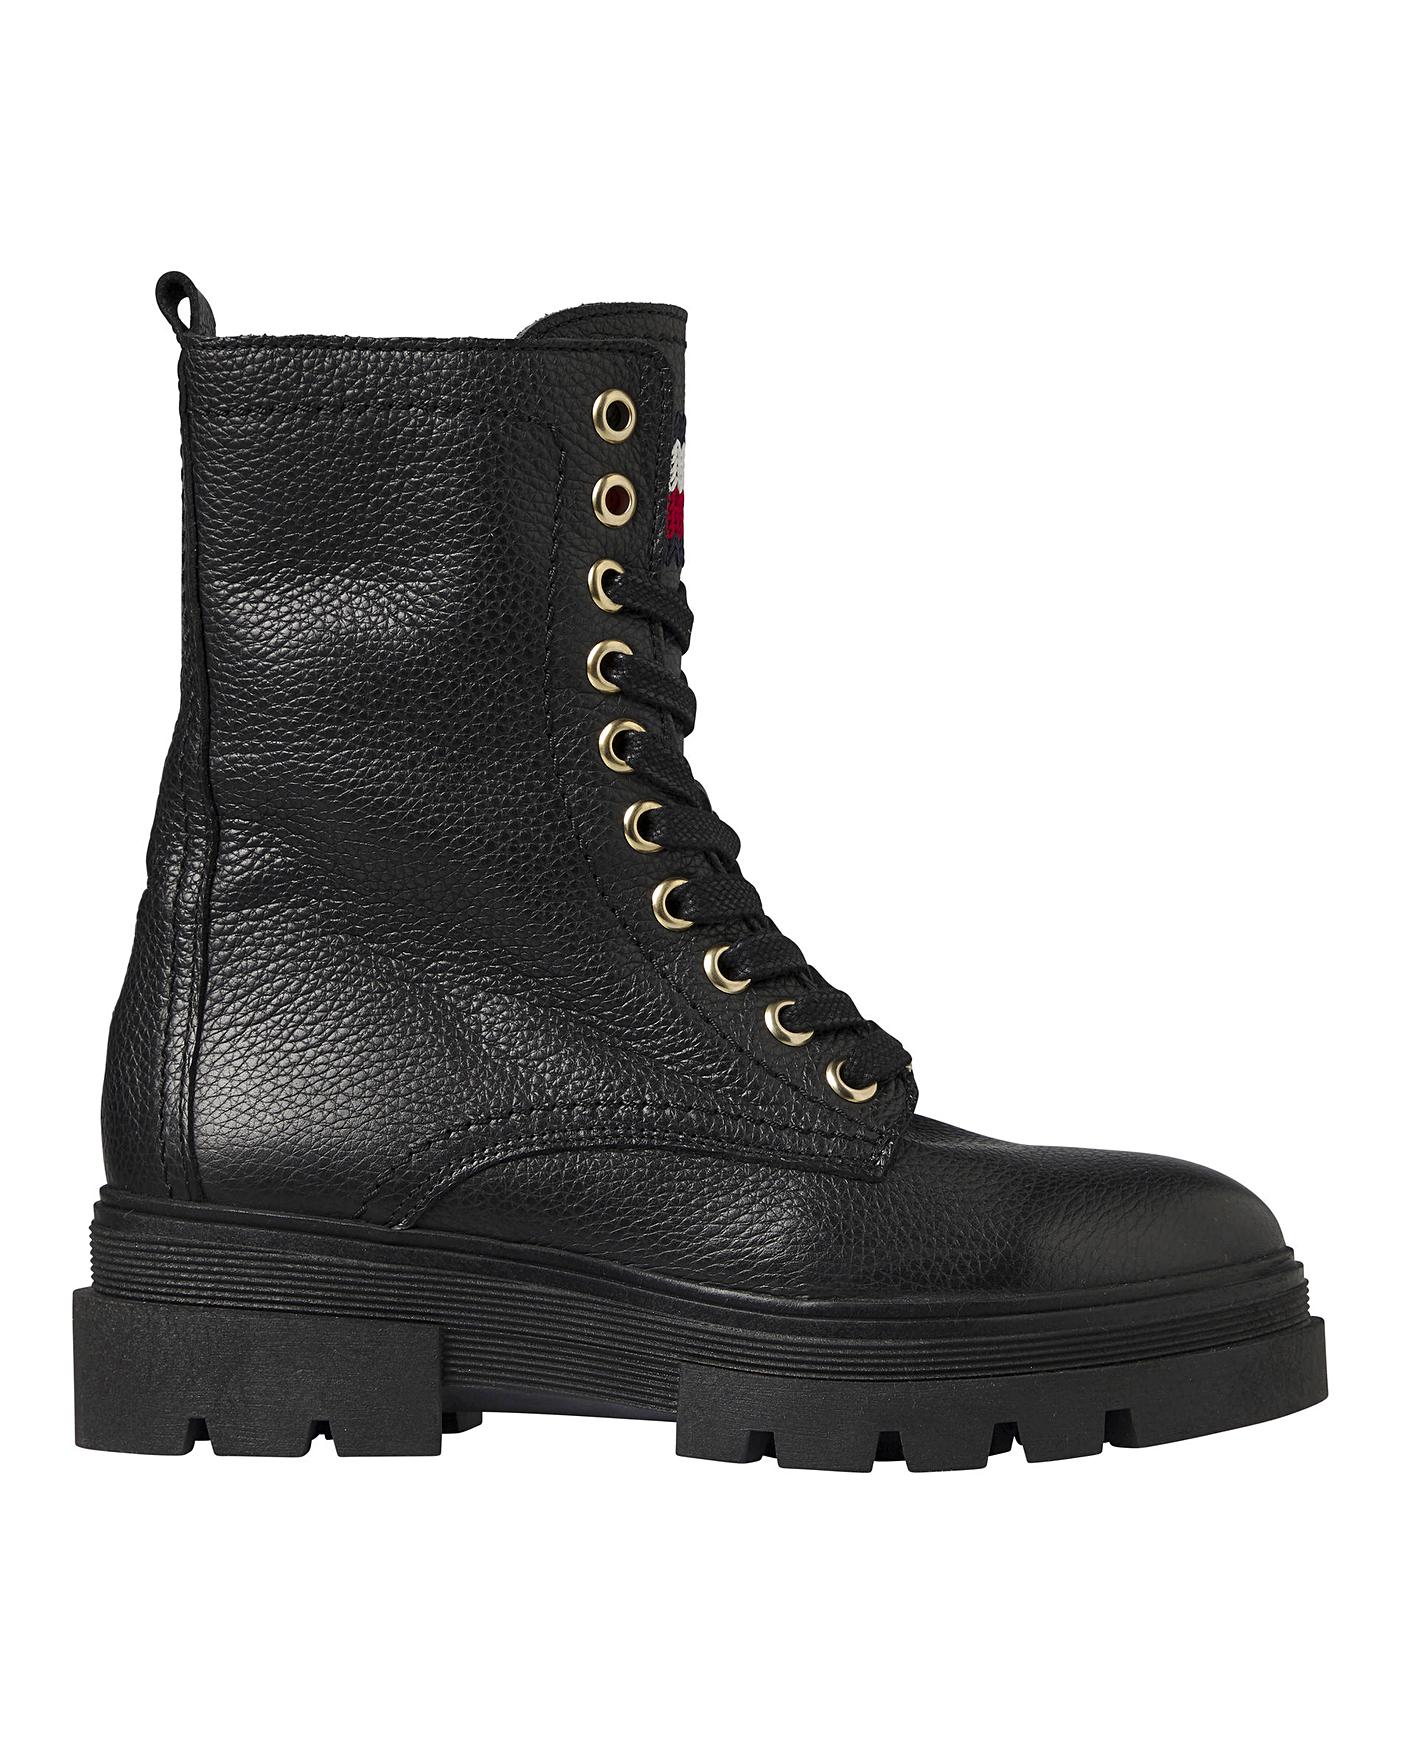 Tommy Hilfiger Rugged Lace Up Boots 